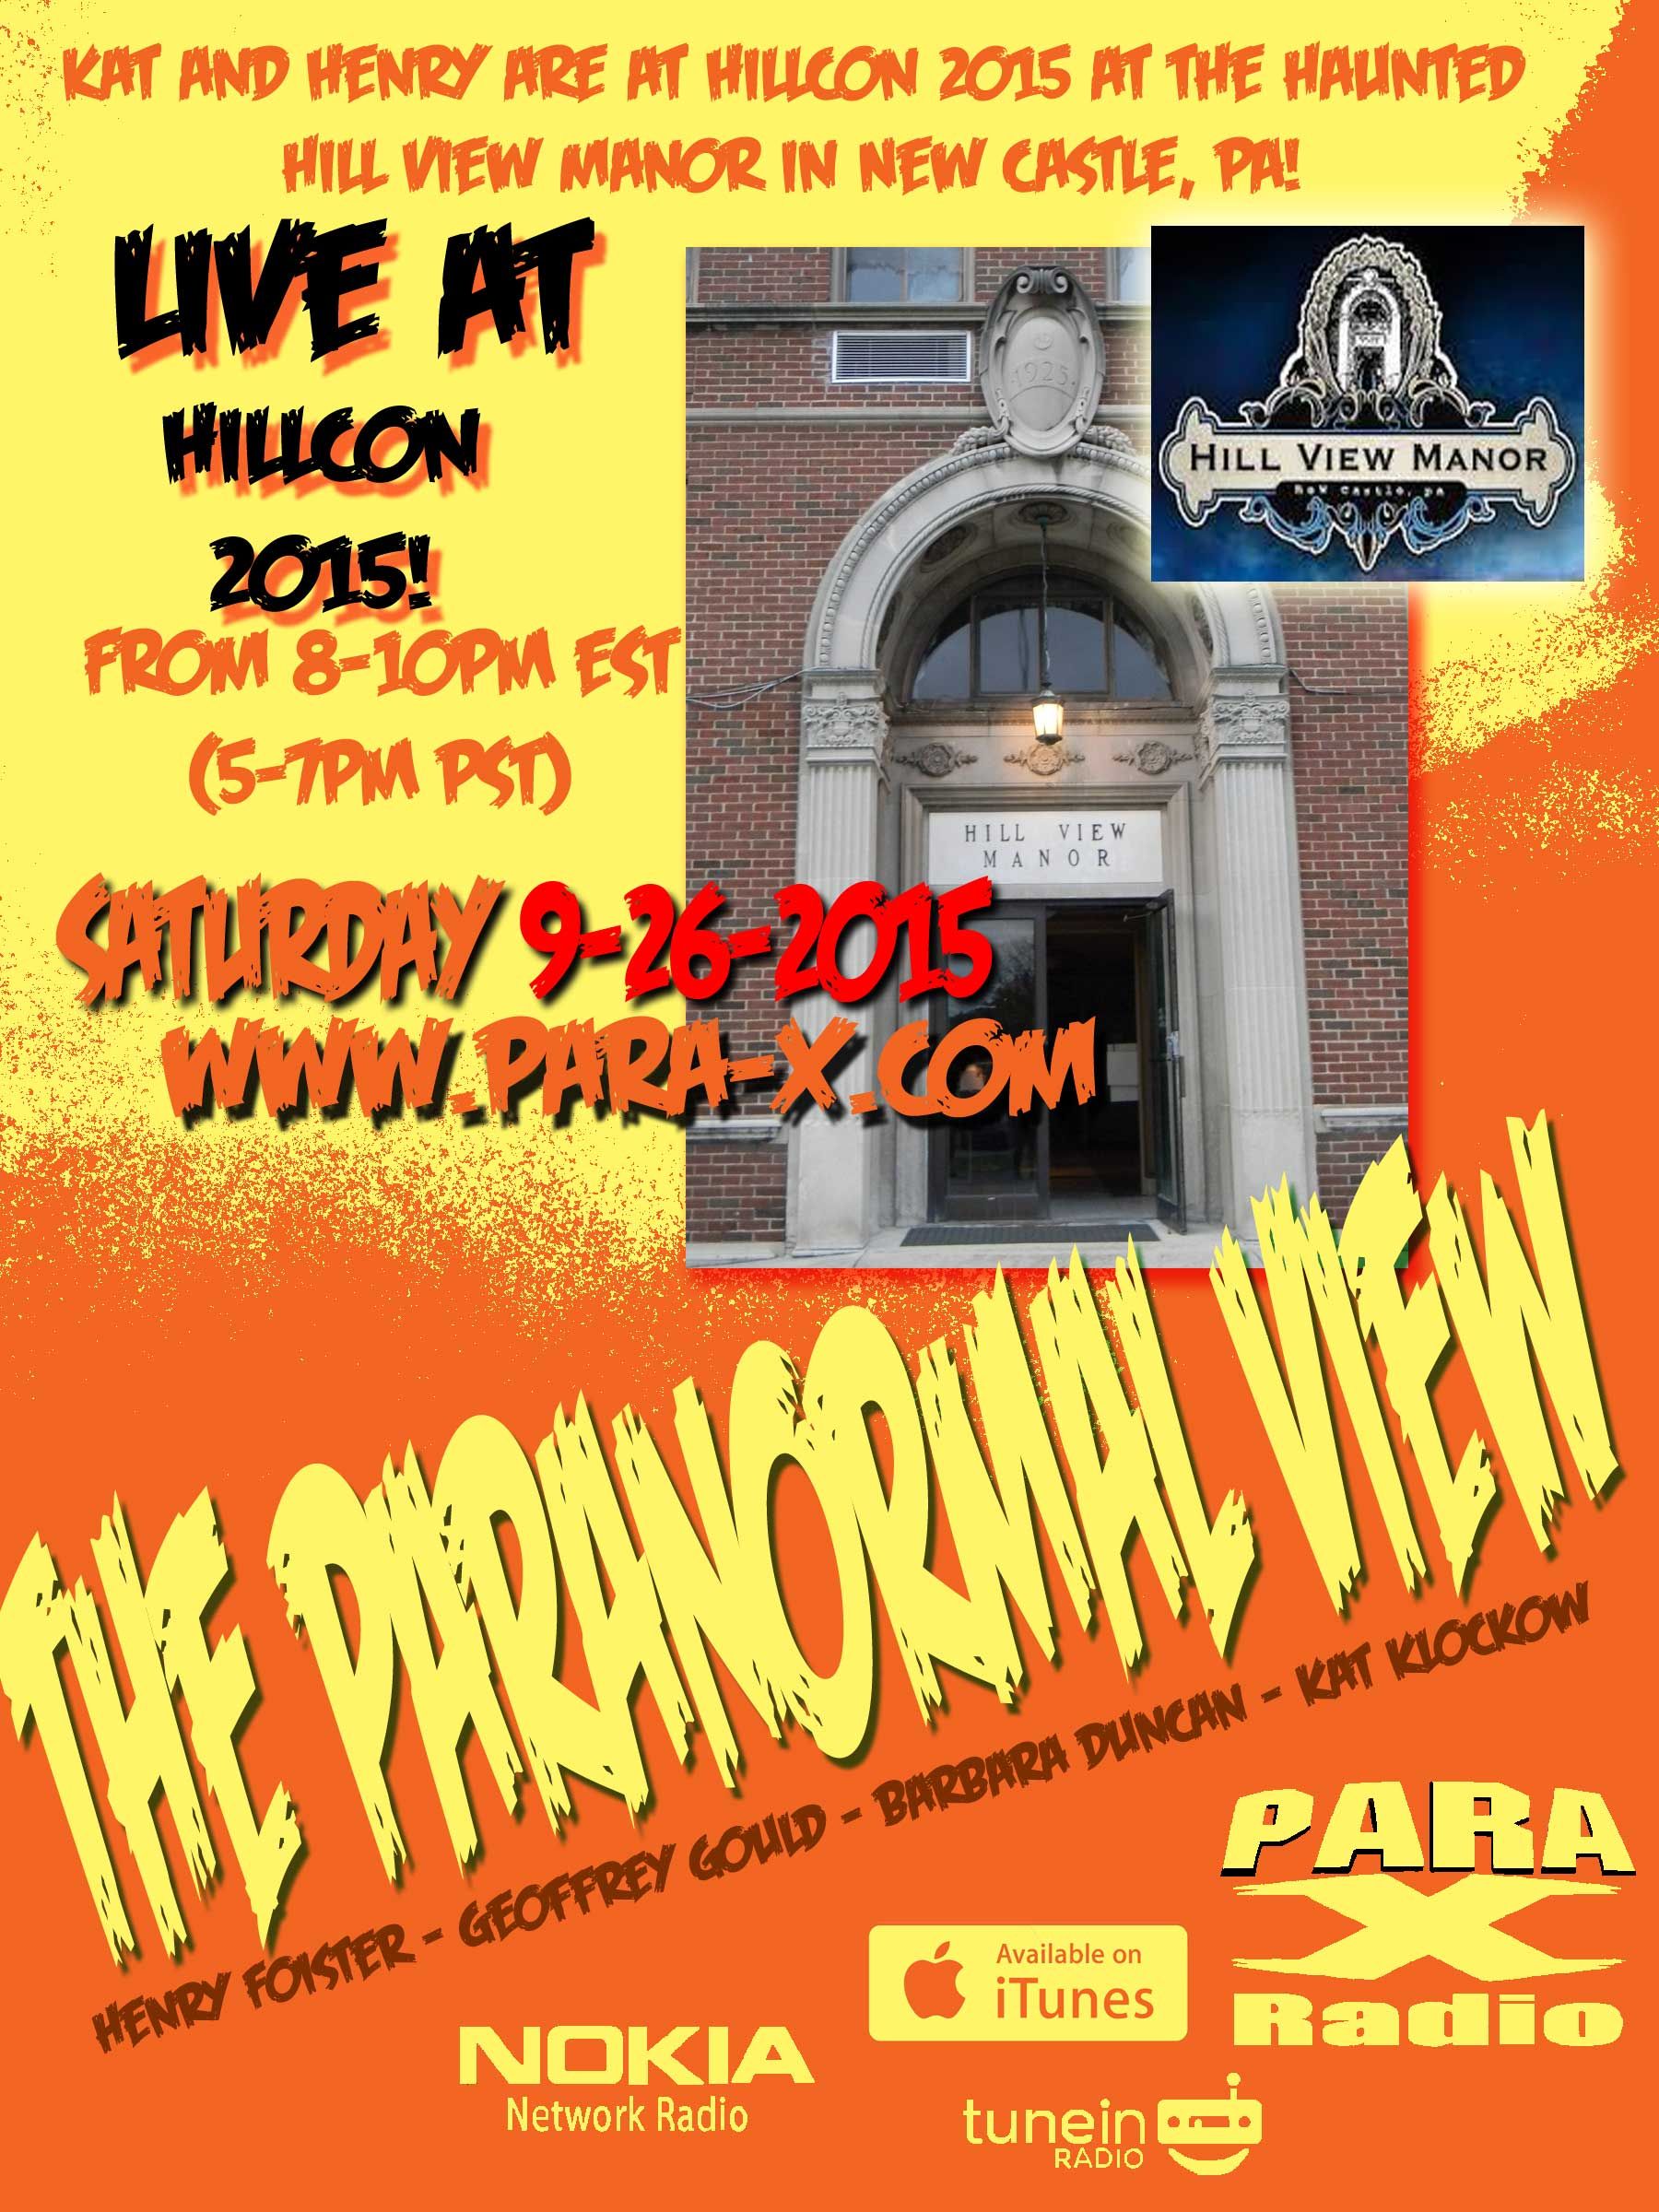 Paranormal View live broadcast from Hill View Manor